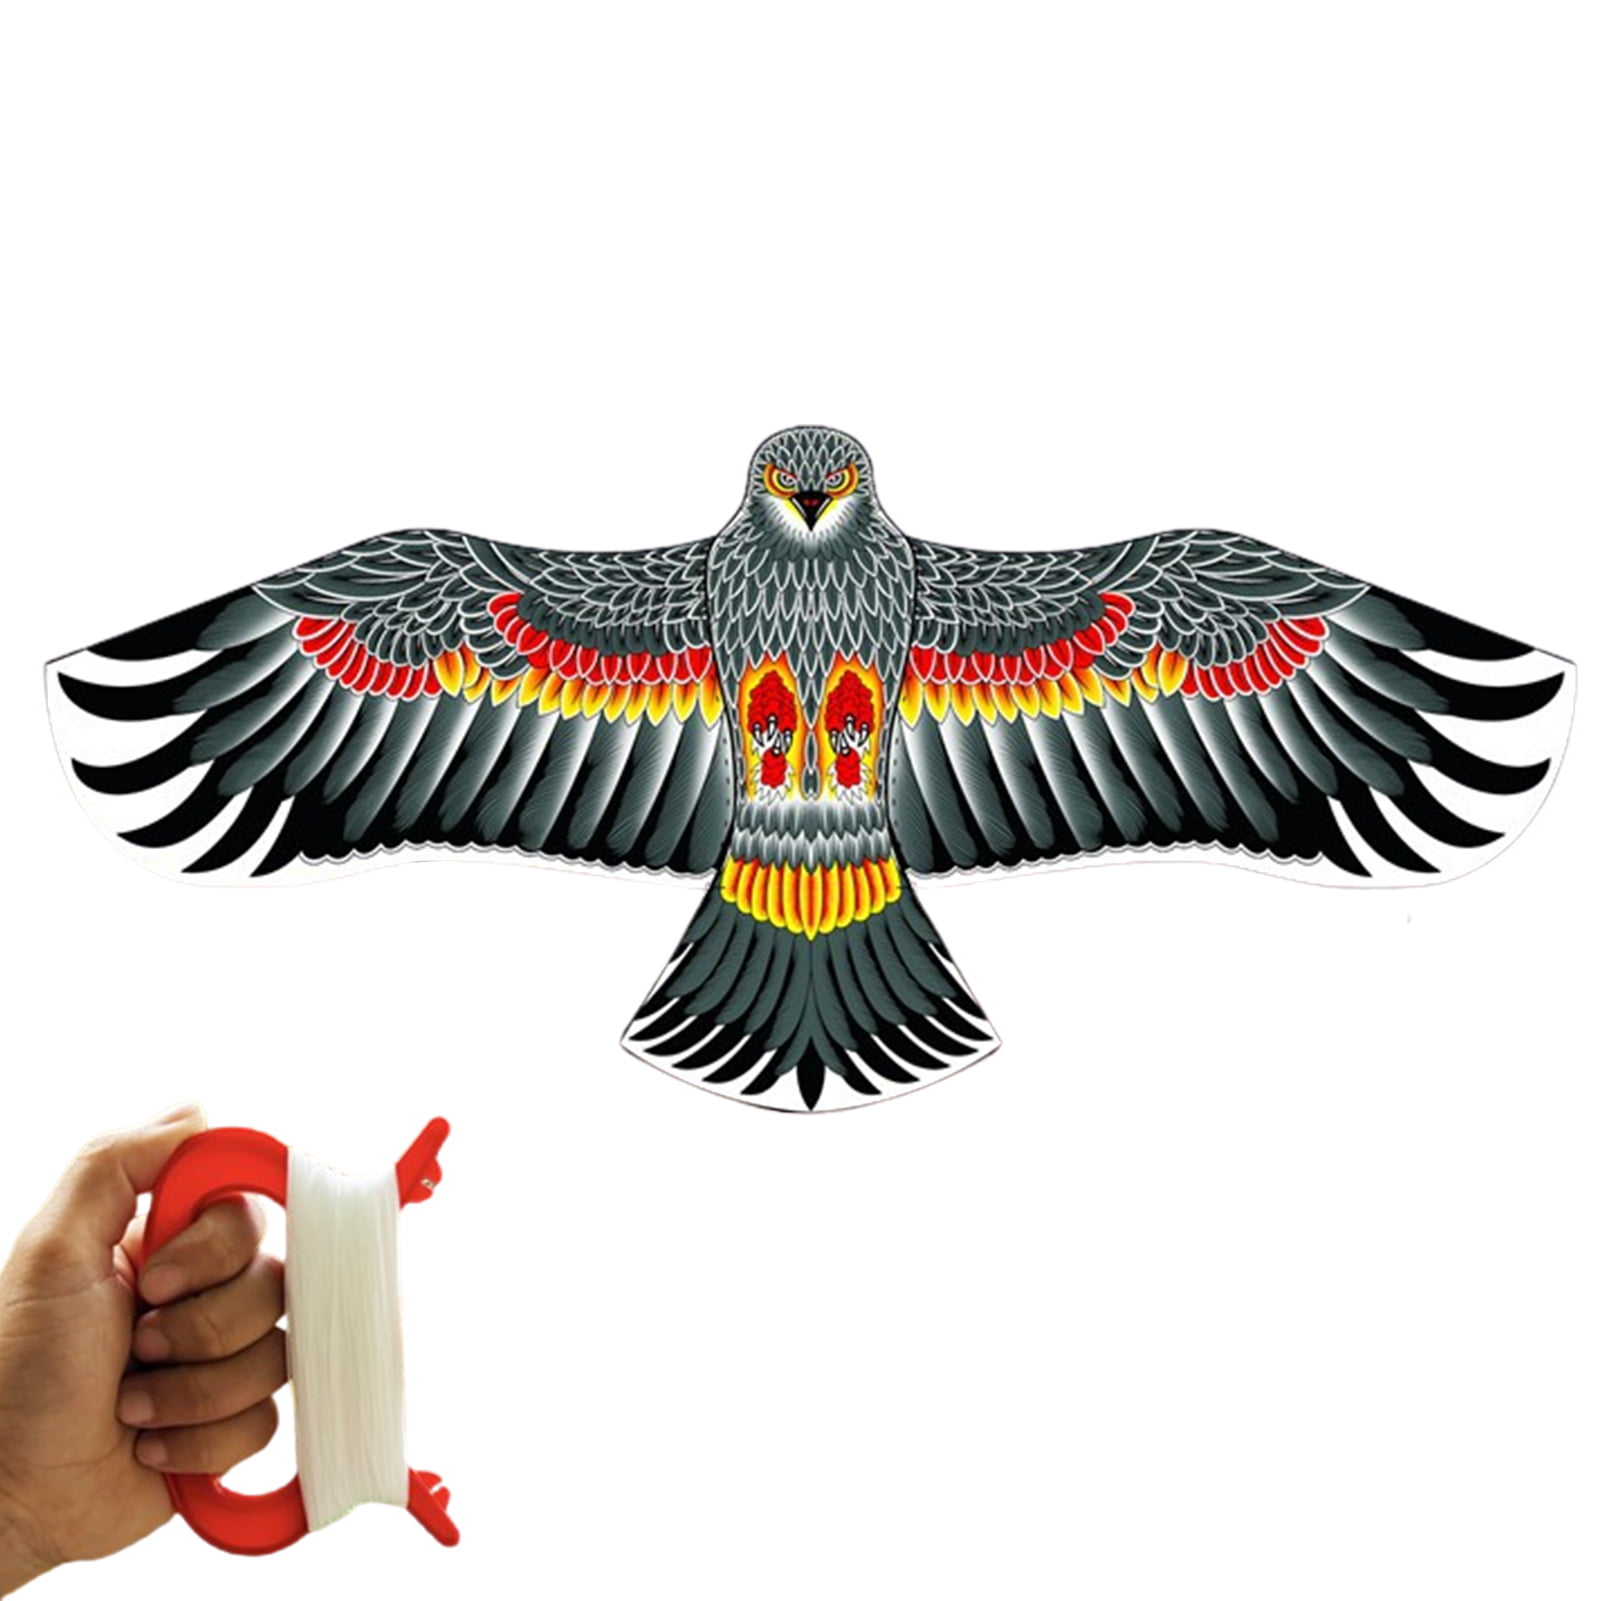 Outdoor Fun Sports Eagle Kite Handle Line High Quality Flying Higher Big Kites 